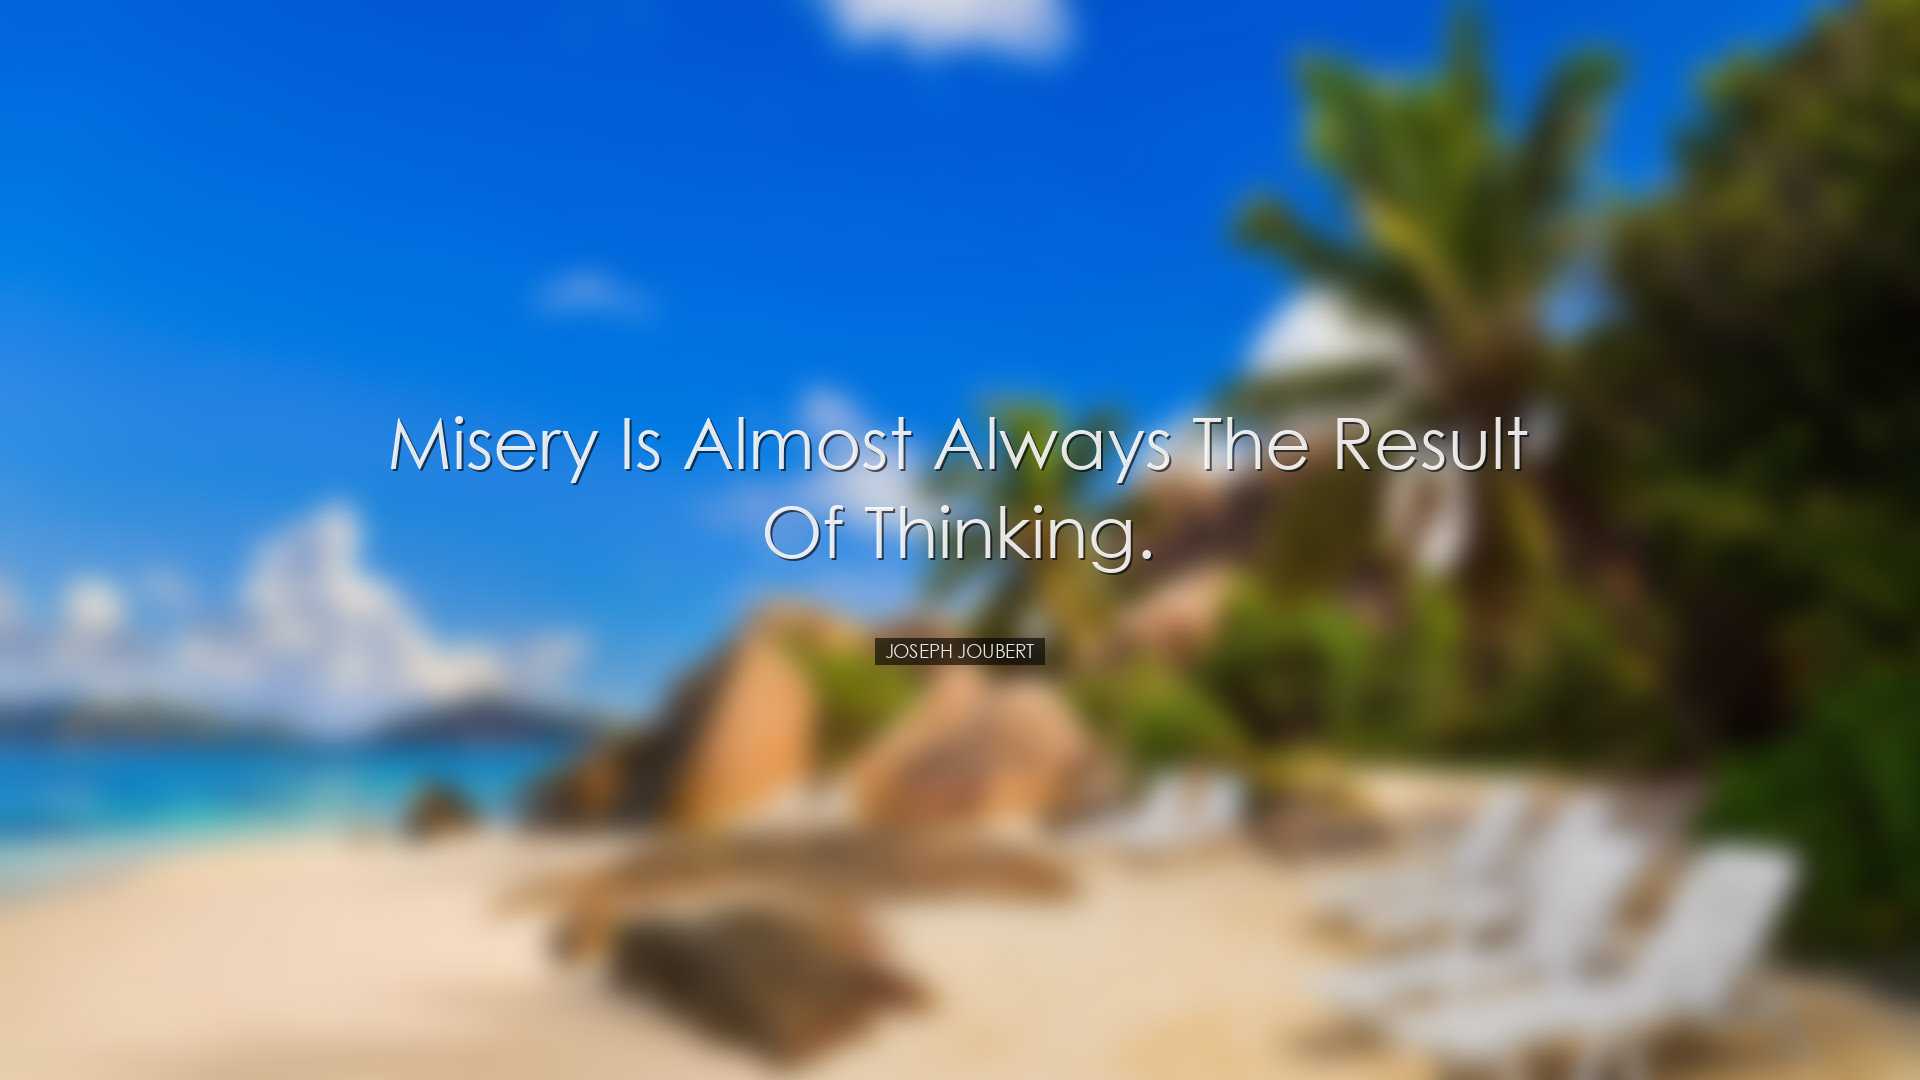 Misery is almost always the result of thinking. - Joseph Joubert